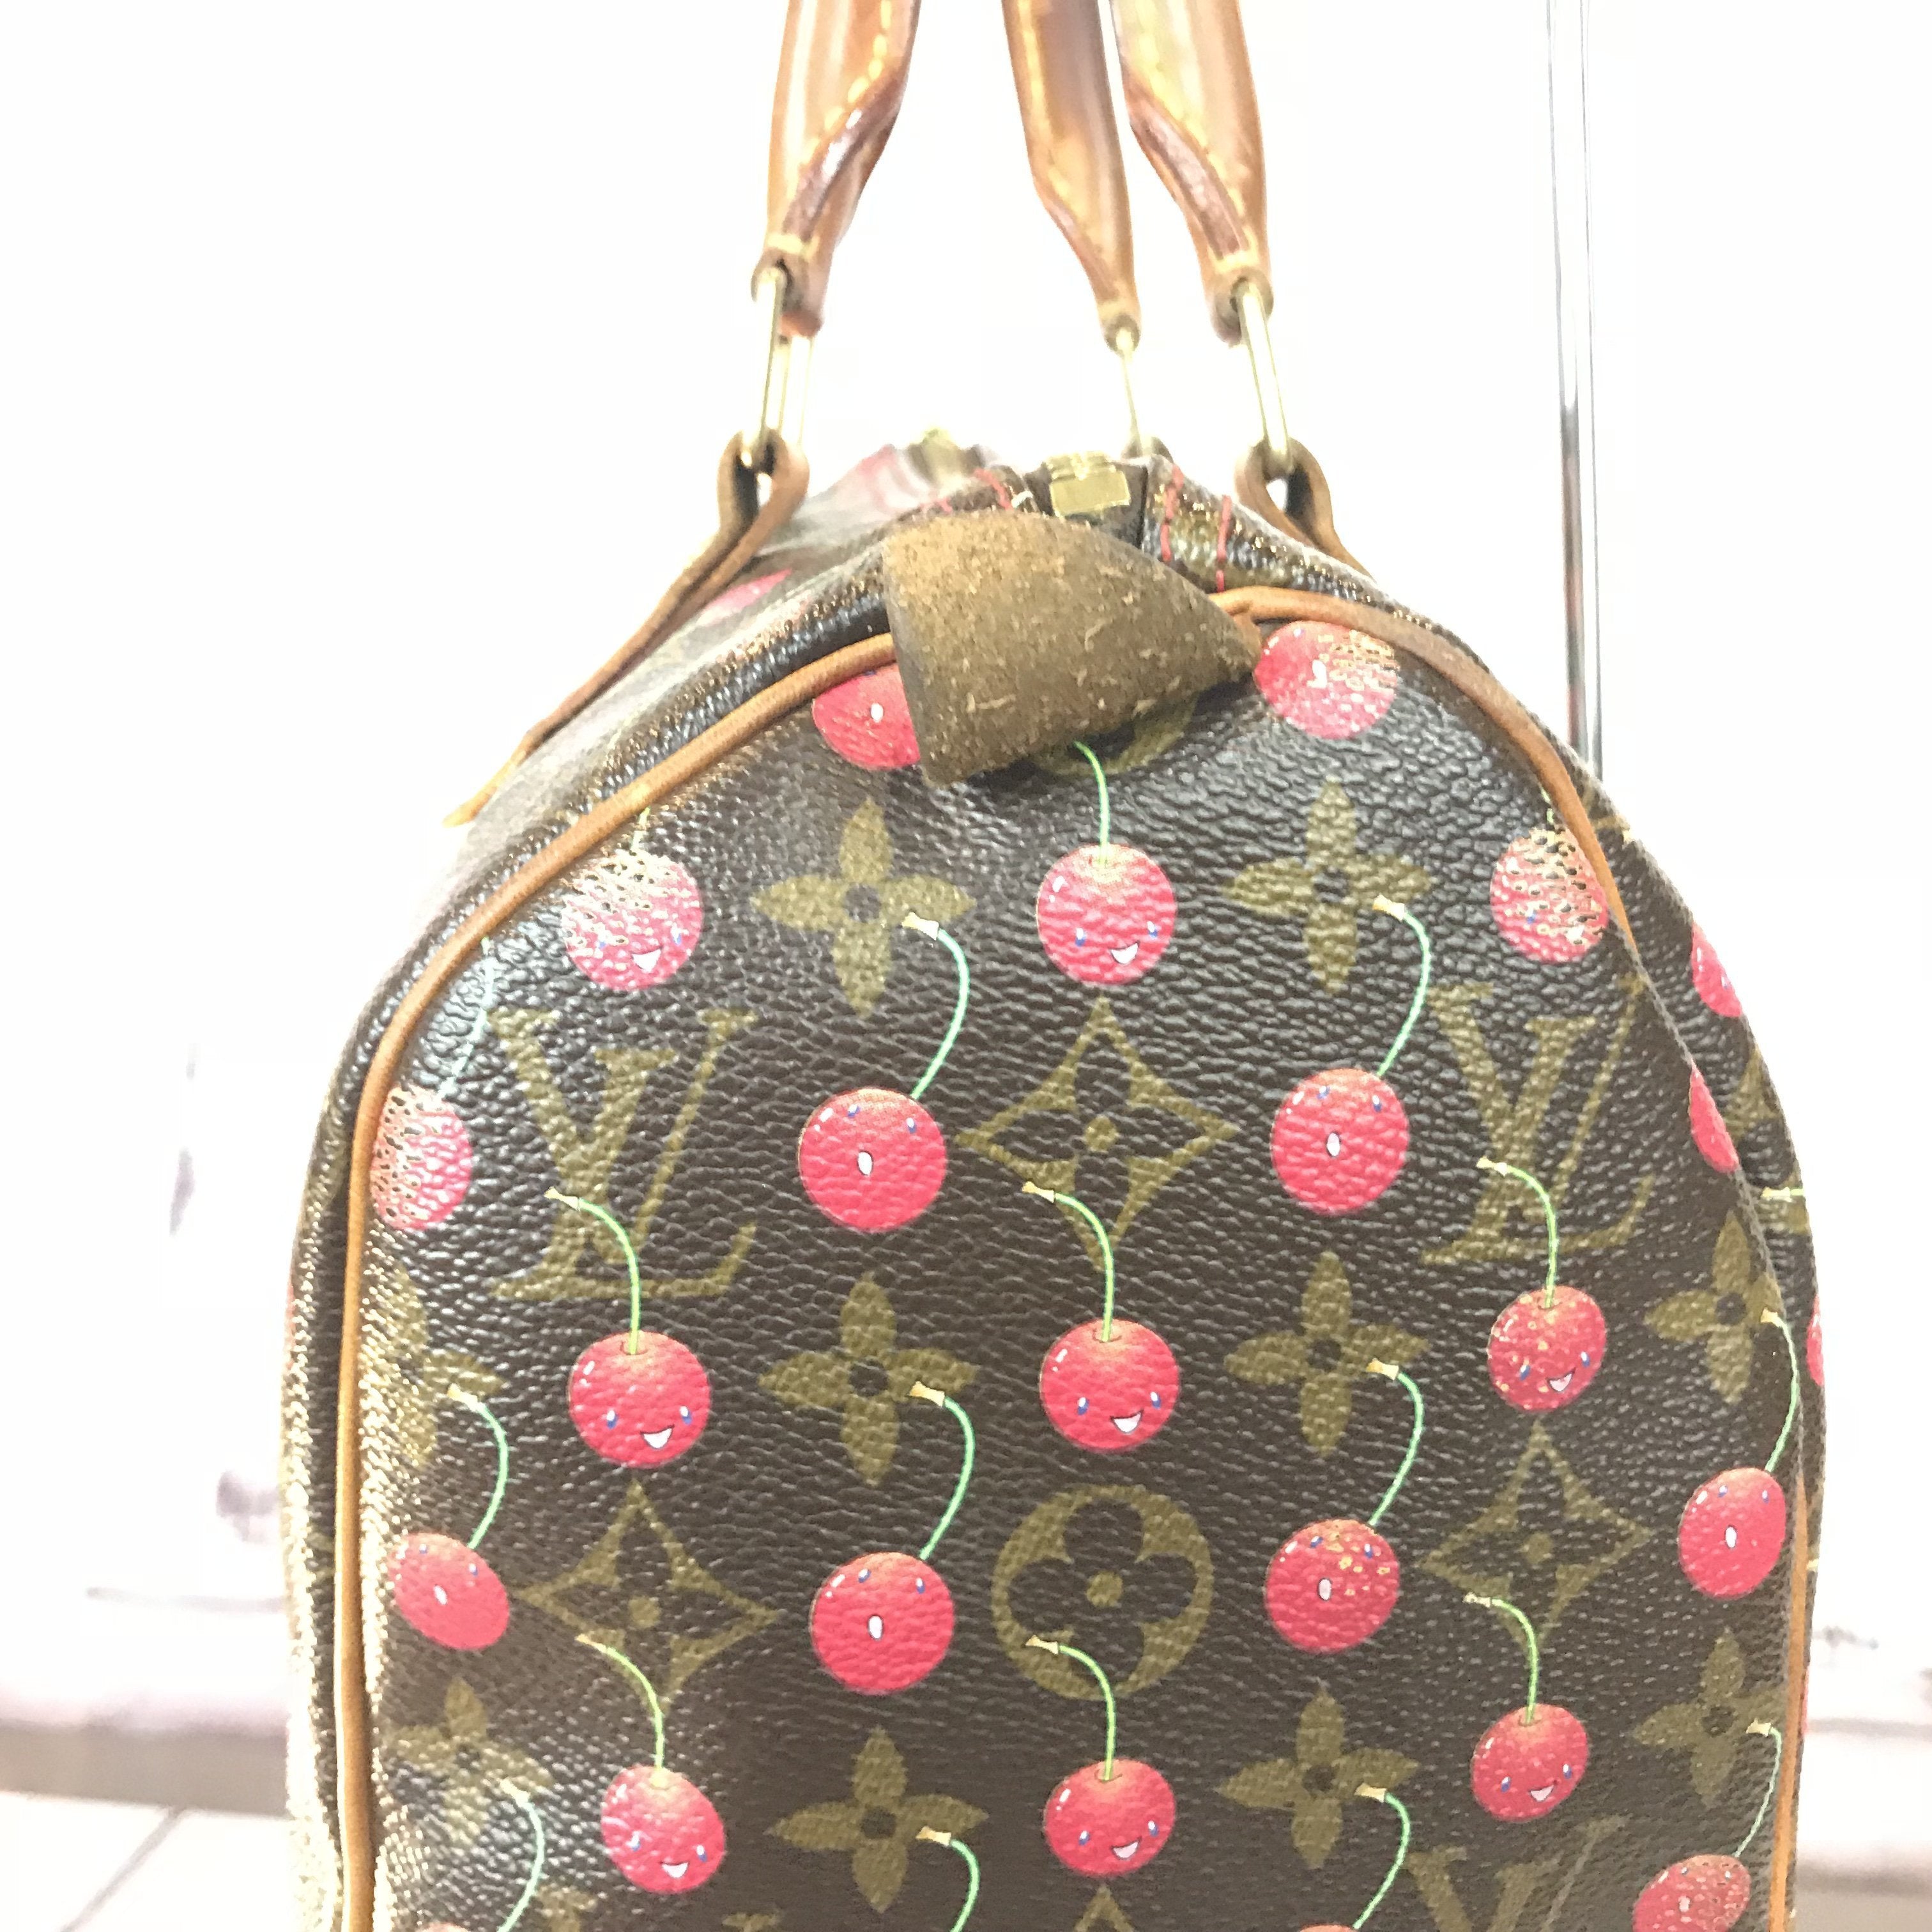 Unboxing of a Louis Vuitton cherries speedy 25 bag in rare cherry